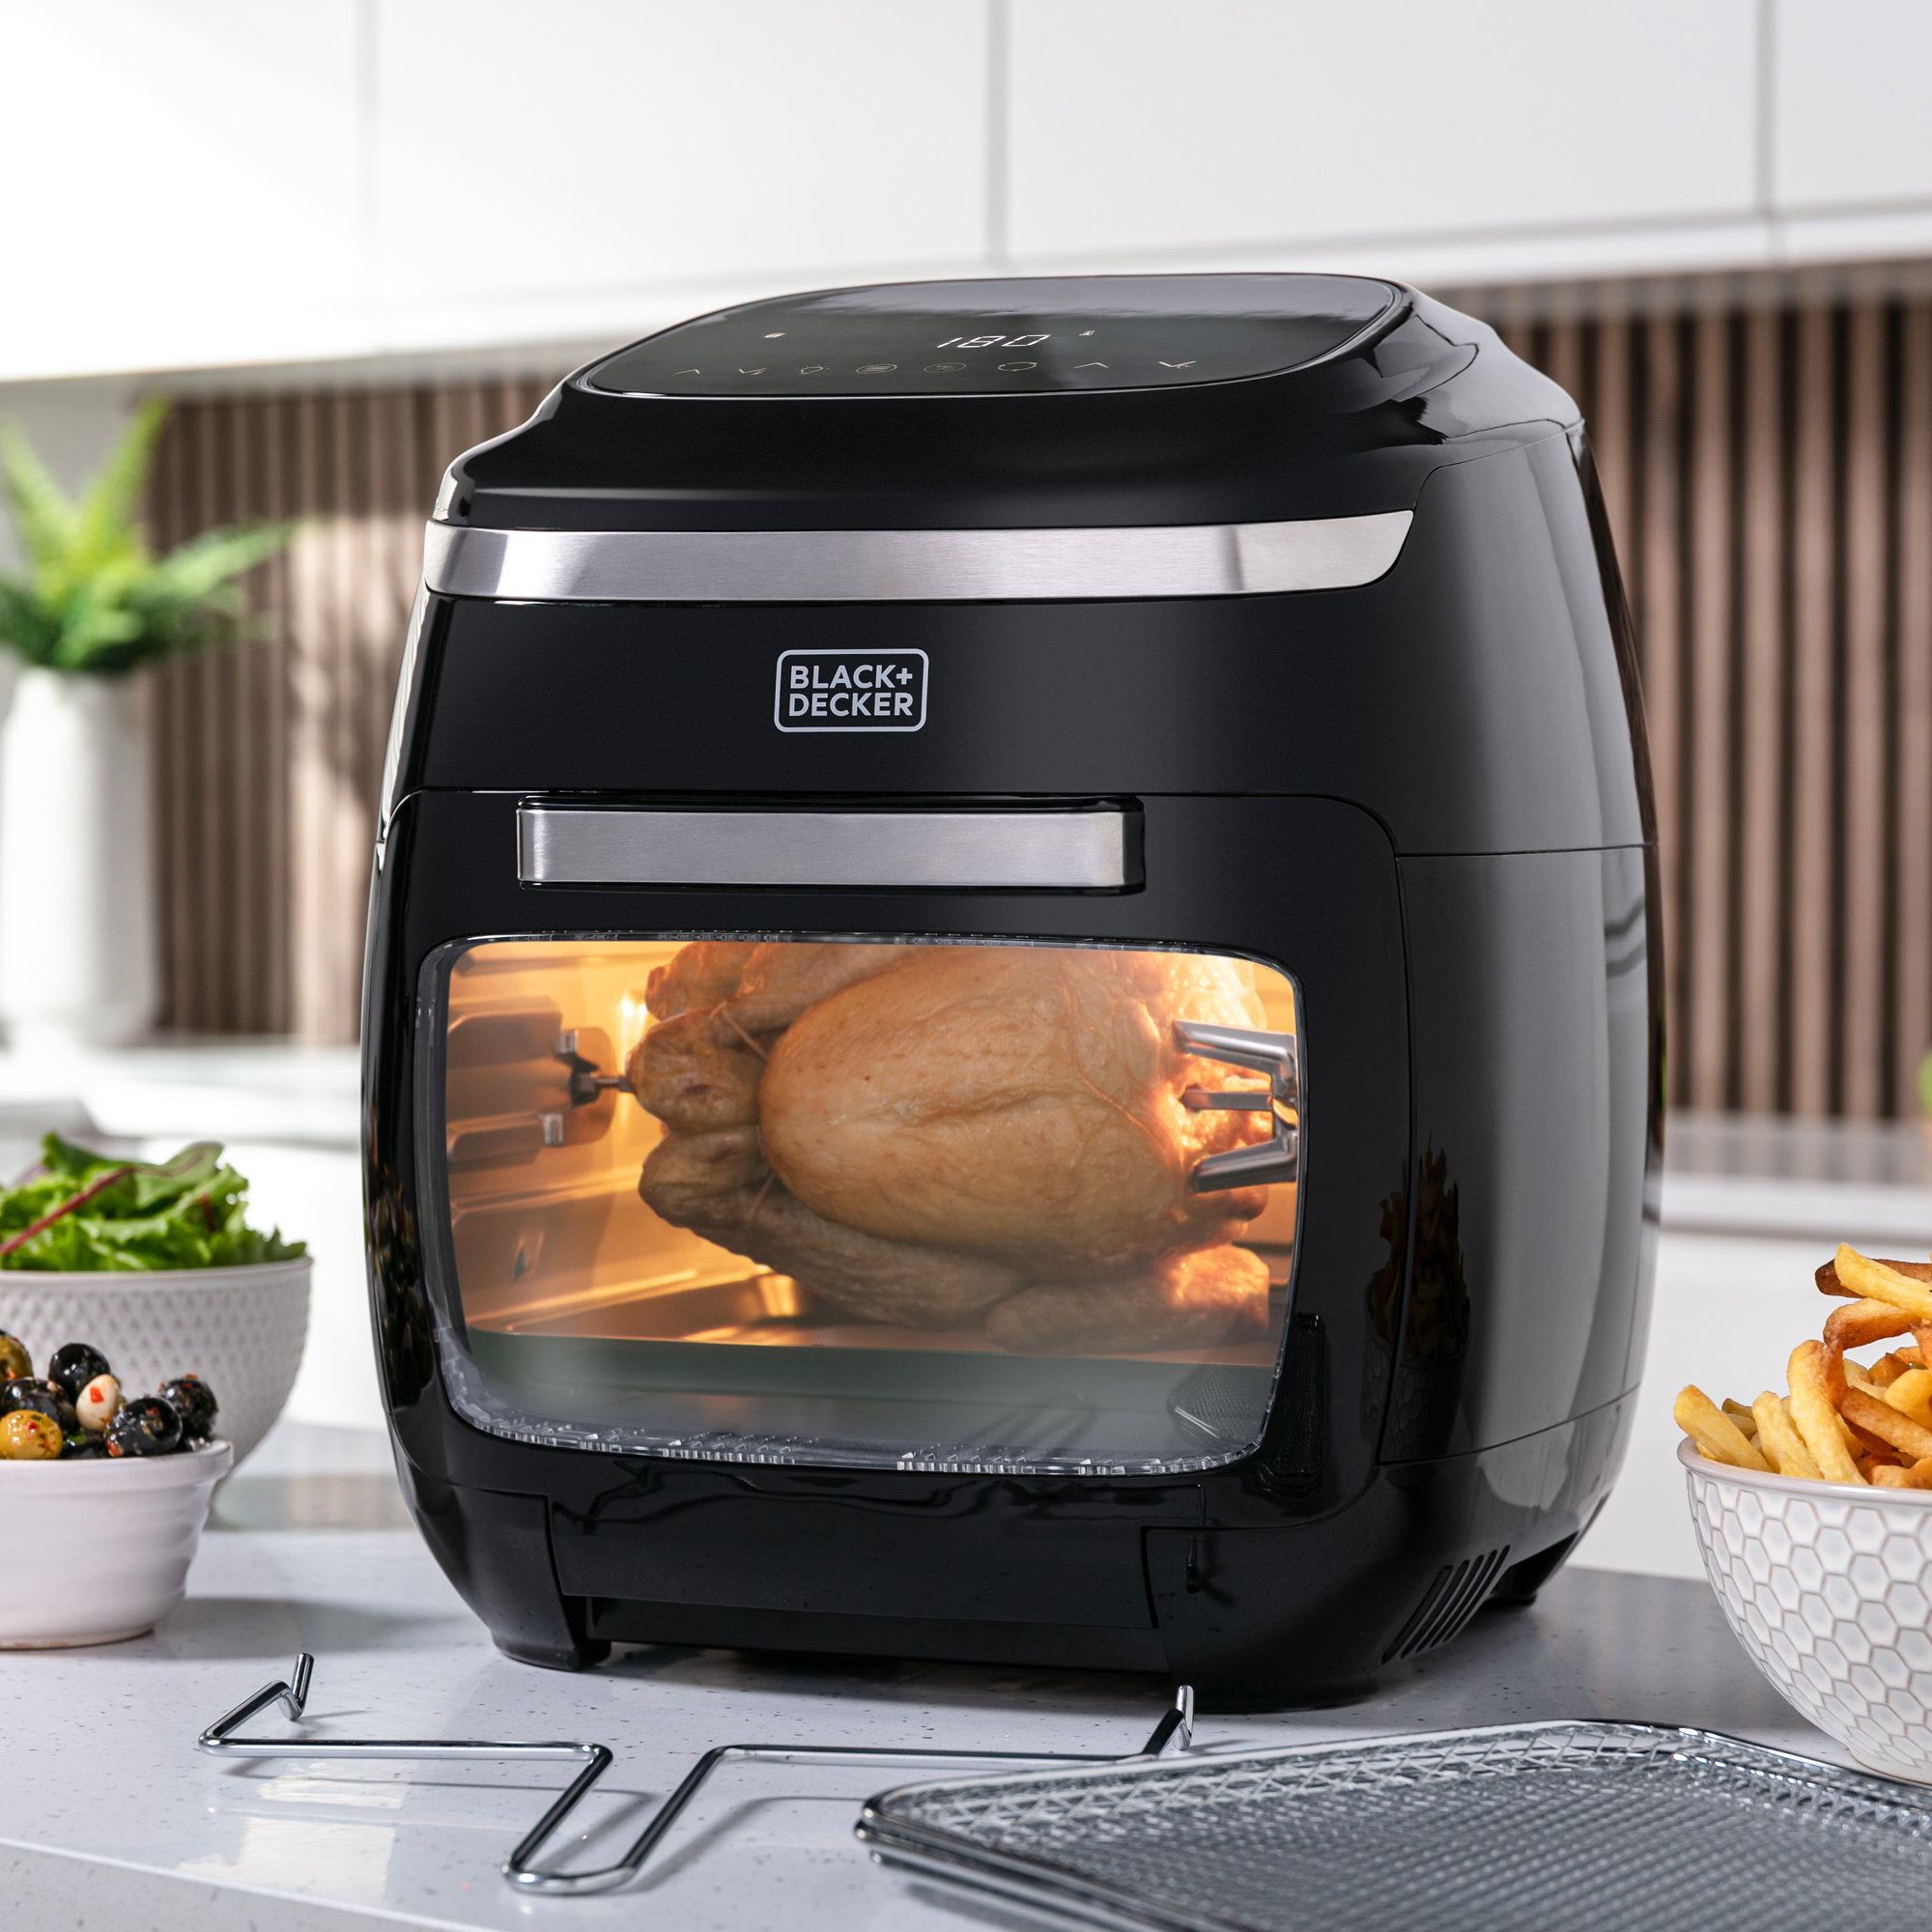 Innoteck Air Fryer Oven With Rotisserie And Dehydrator: cheap air